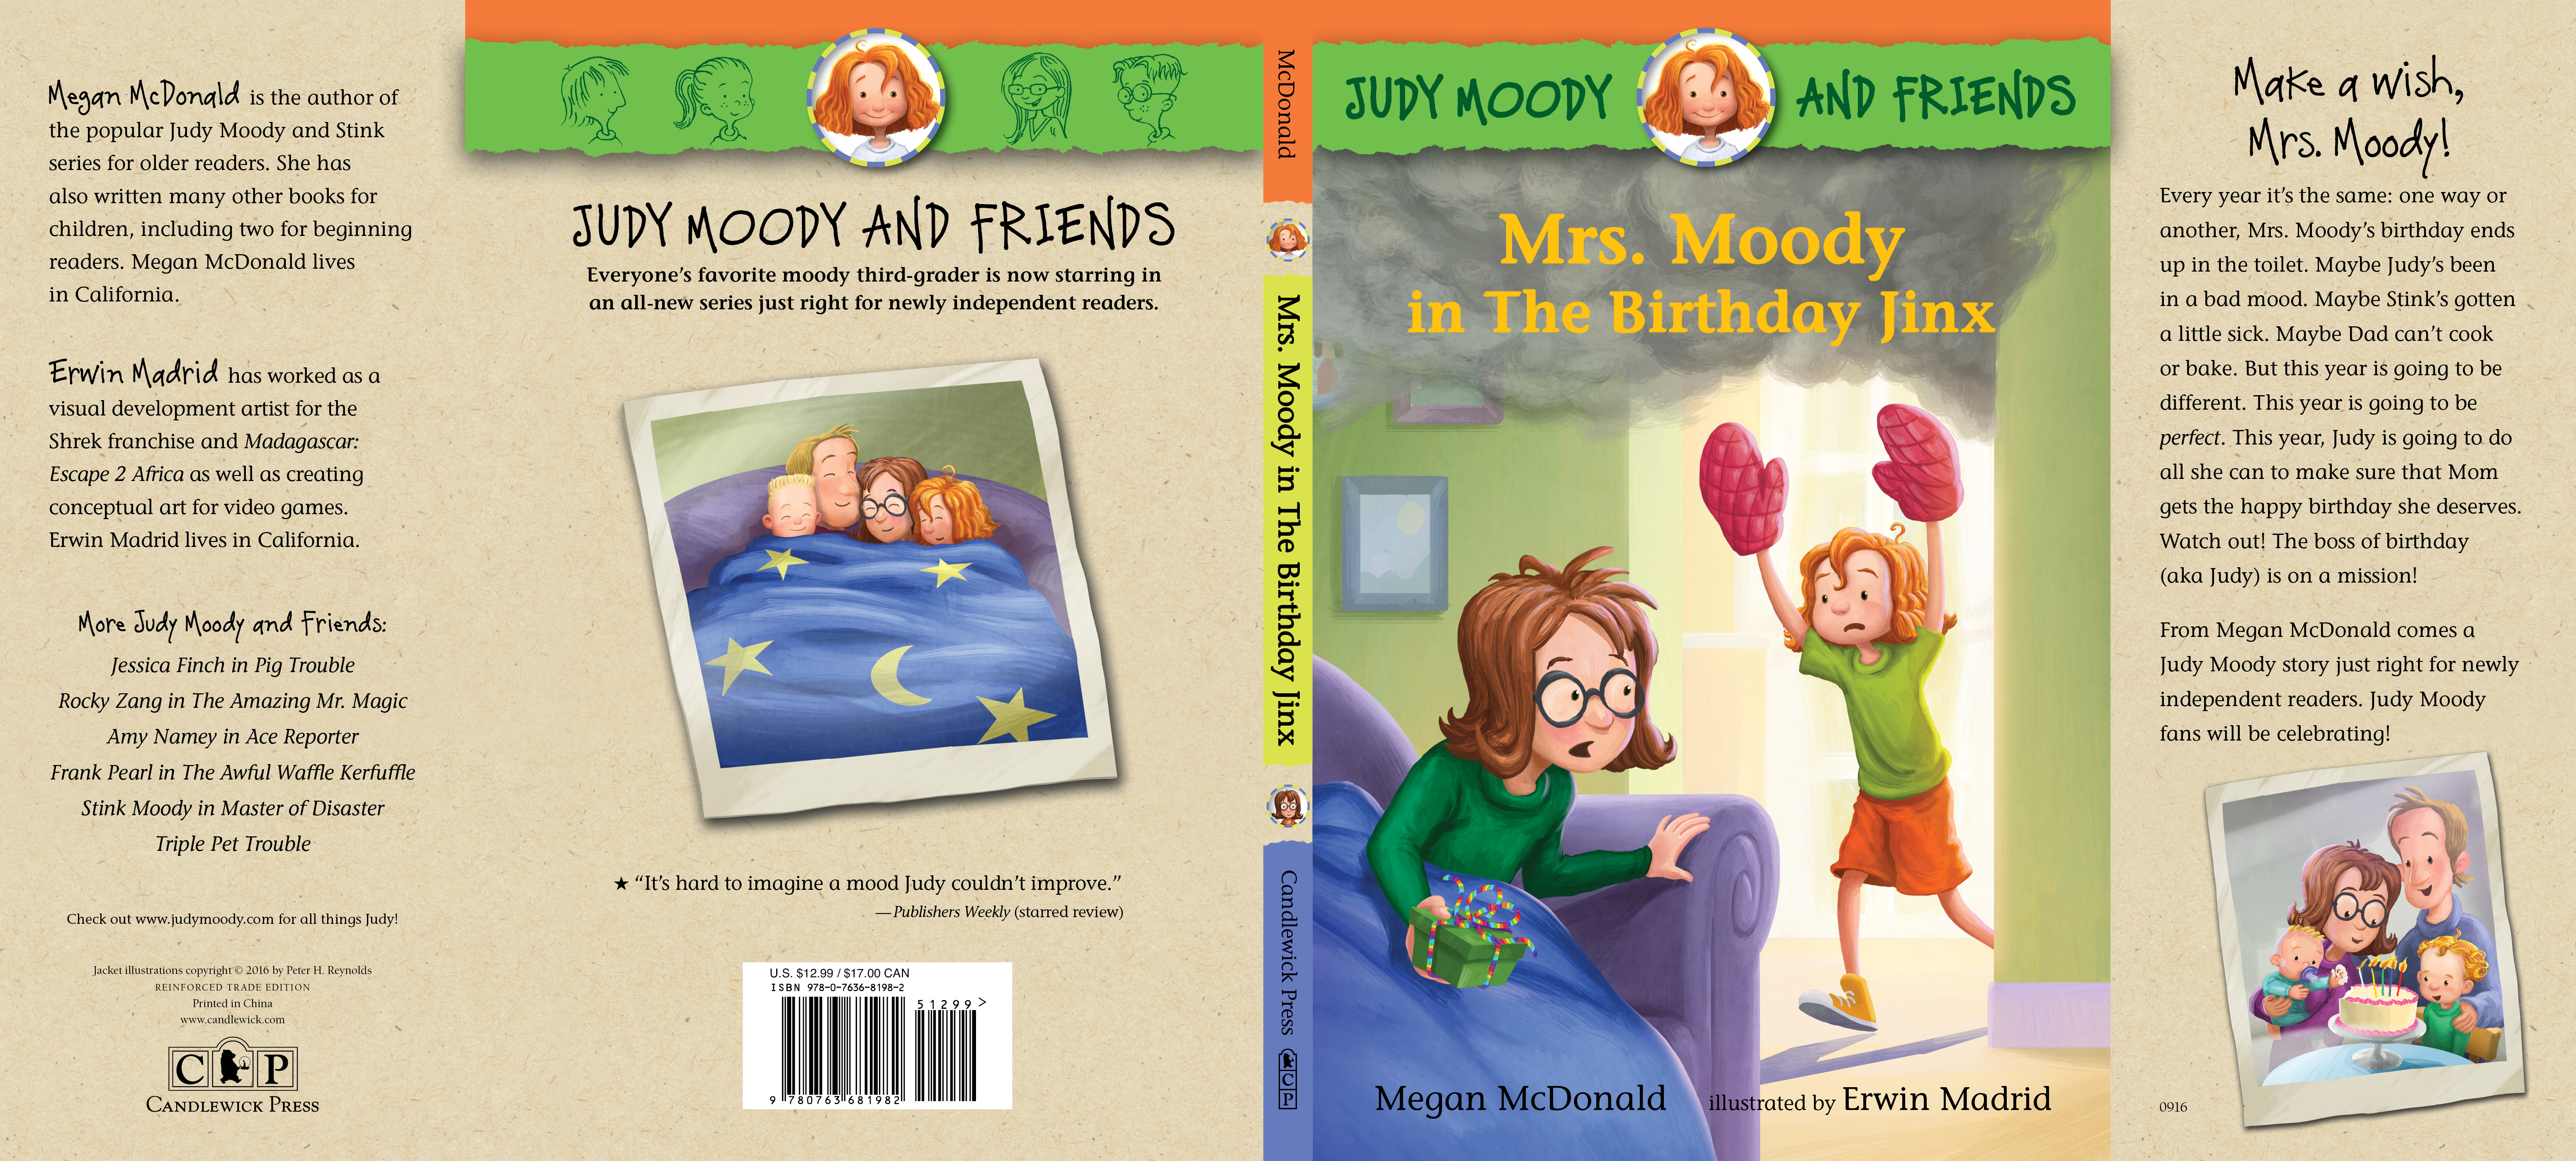 Full jacket for MRS. MOODY IN THE BIRTHDAY JINX